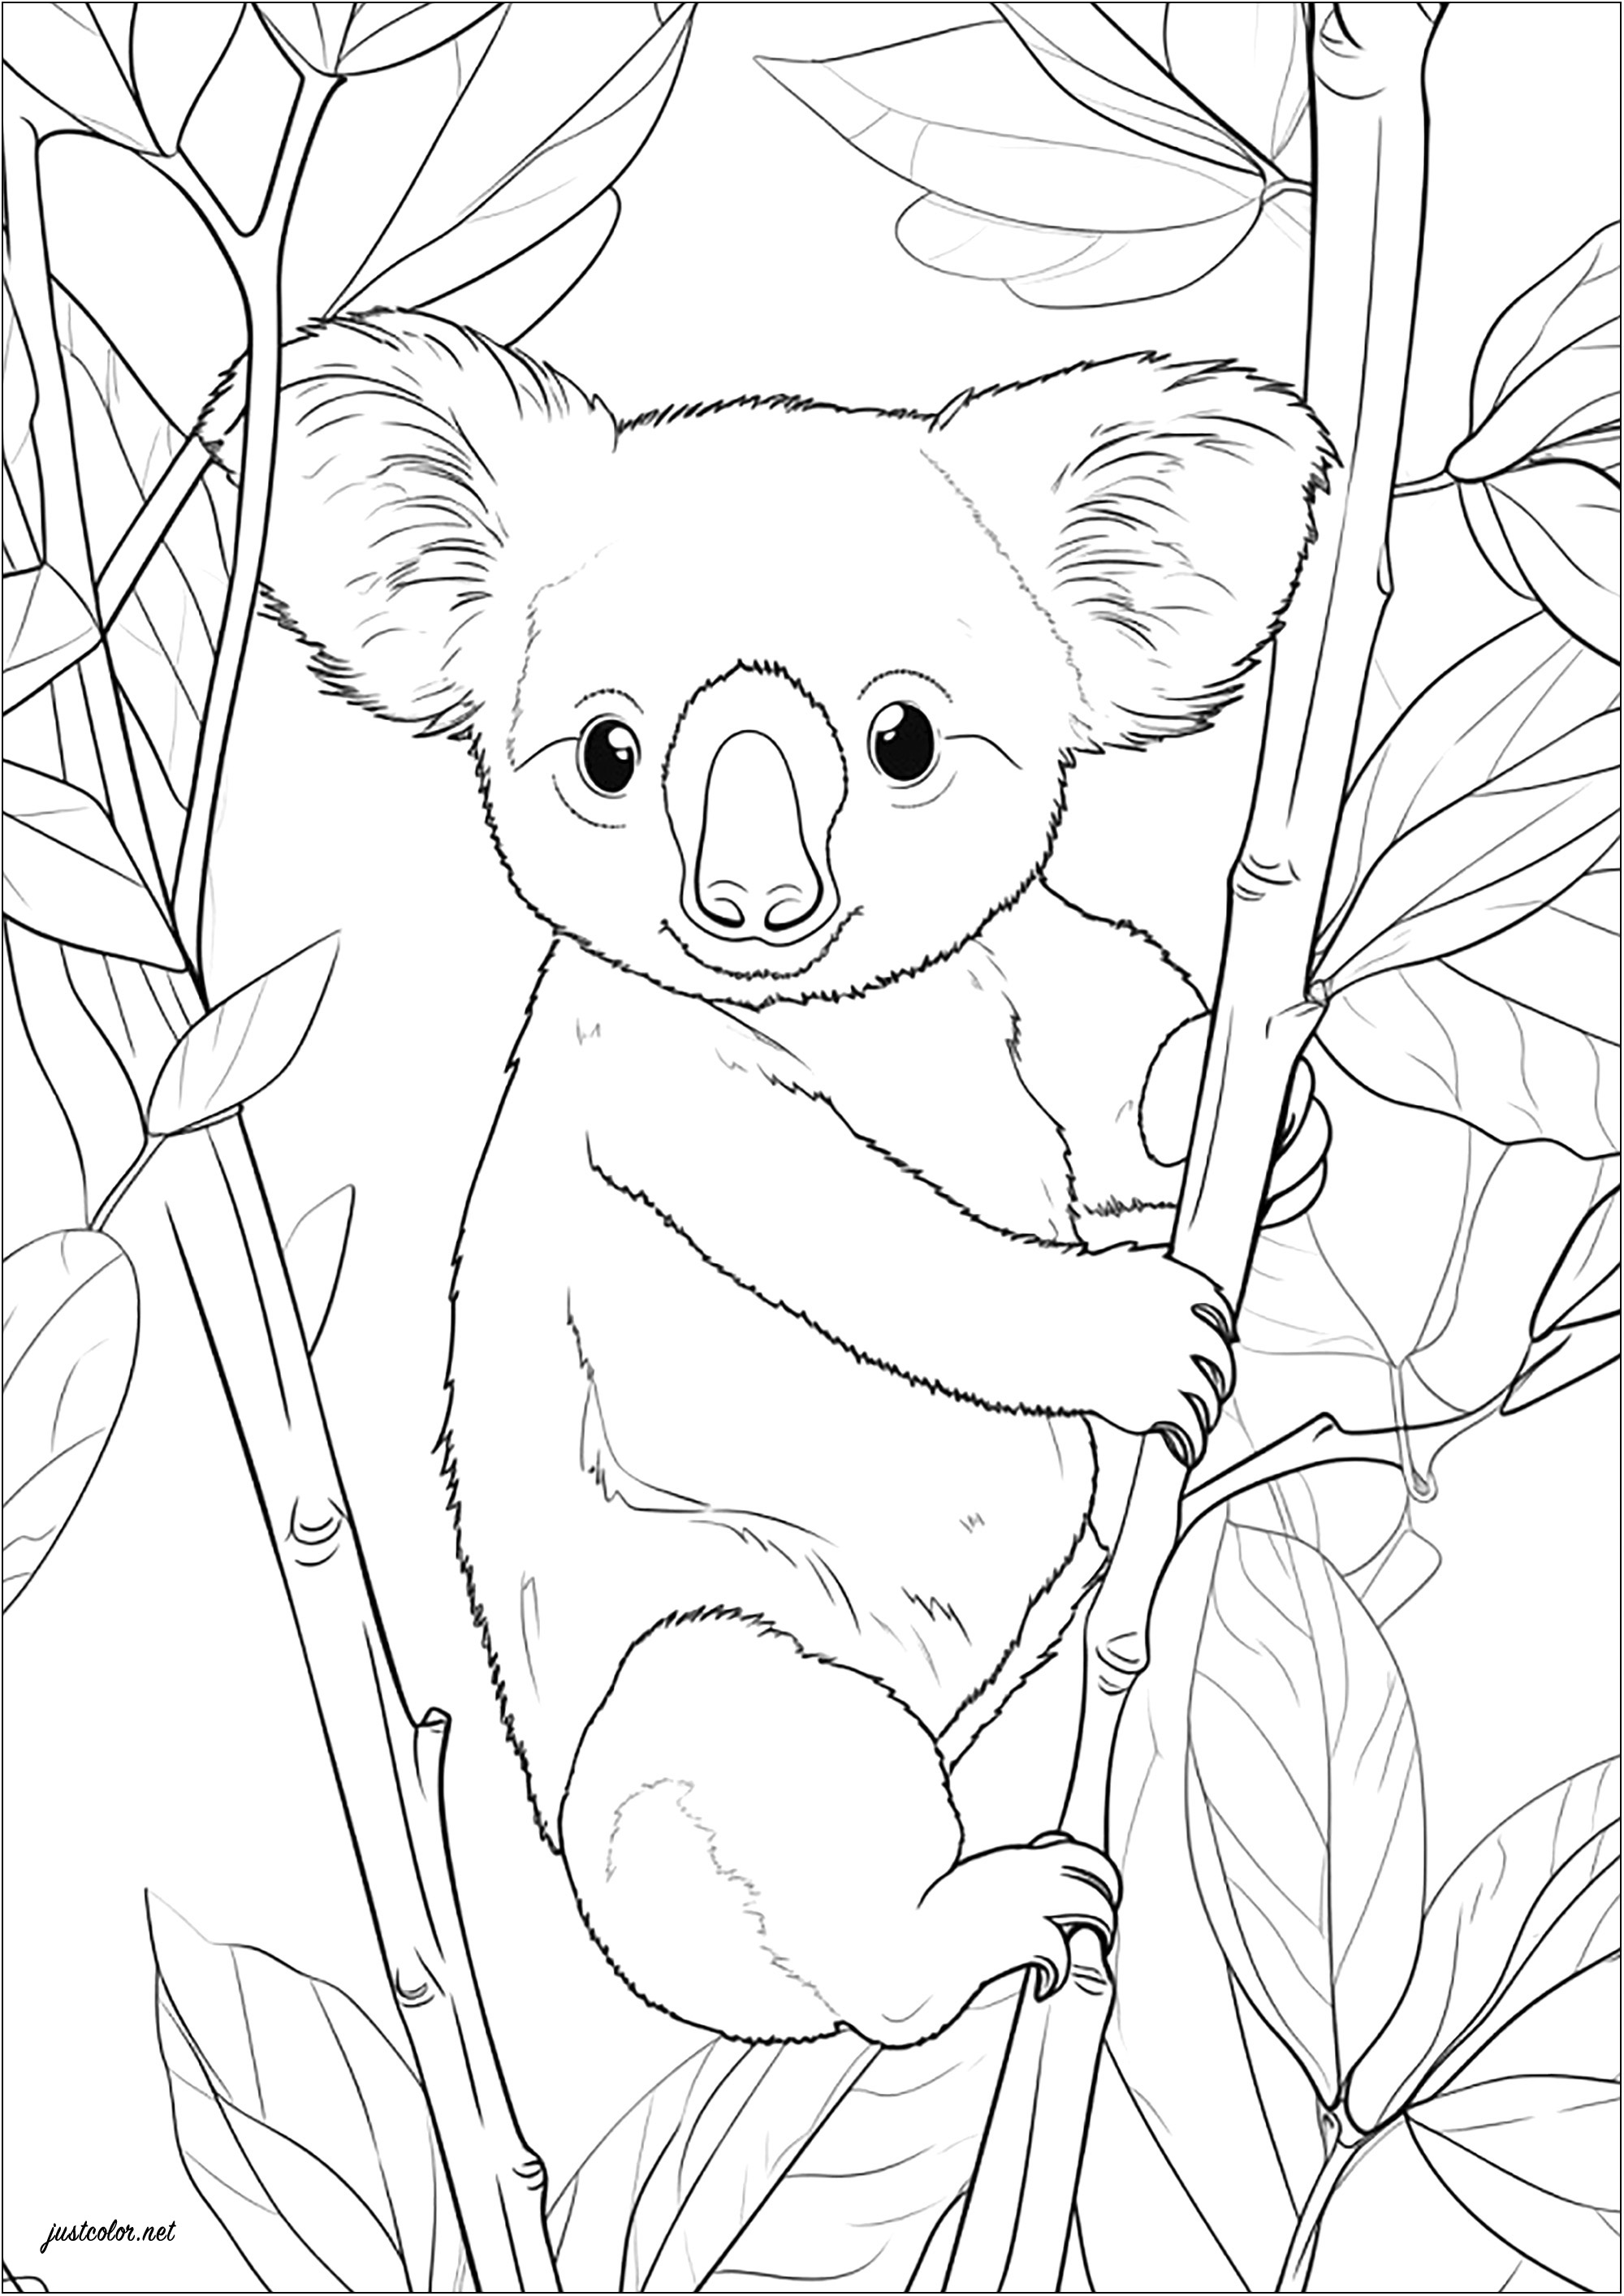 Realistic koala clinging to a bamboo branch - Koalas Kids Coloring Pages